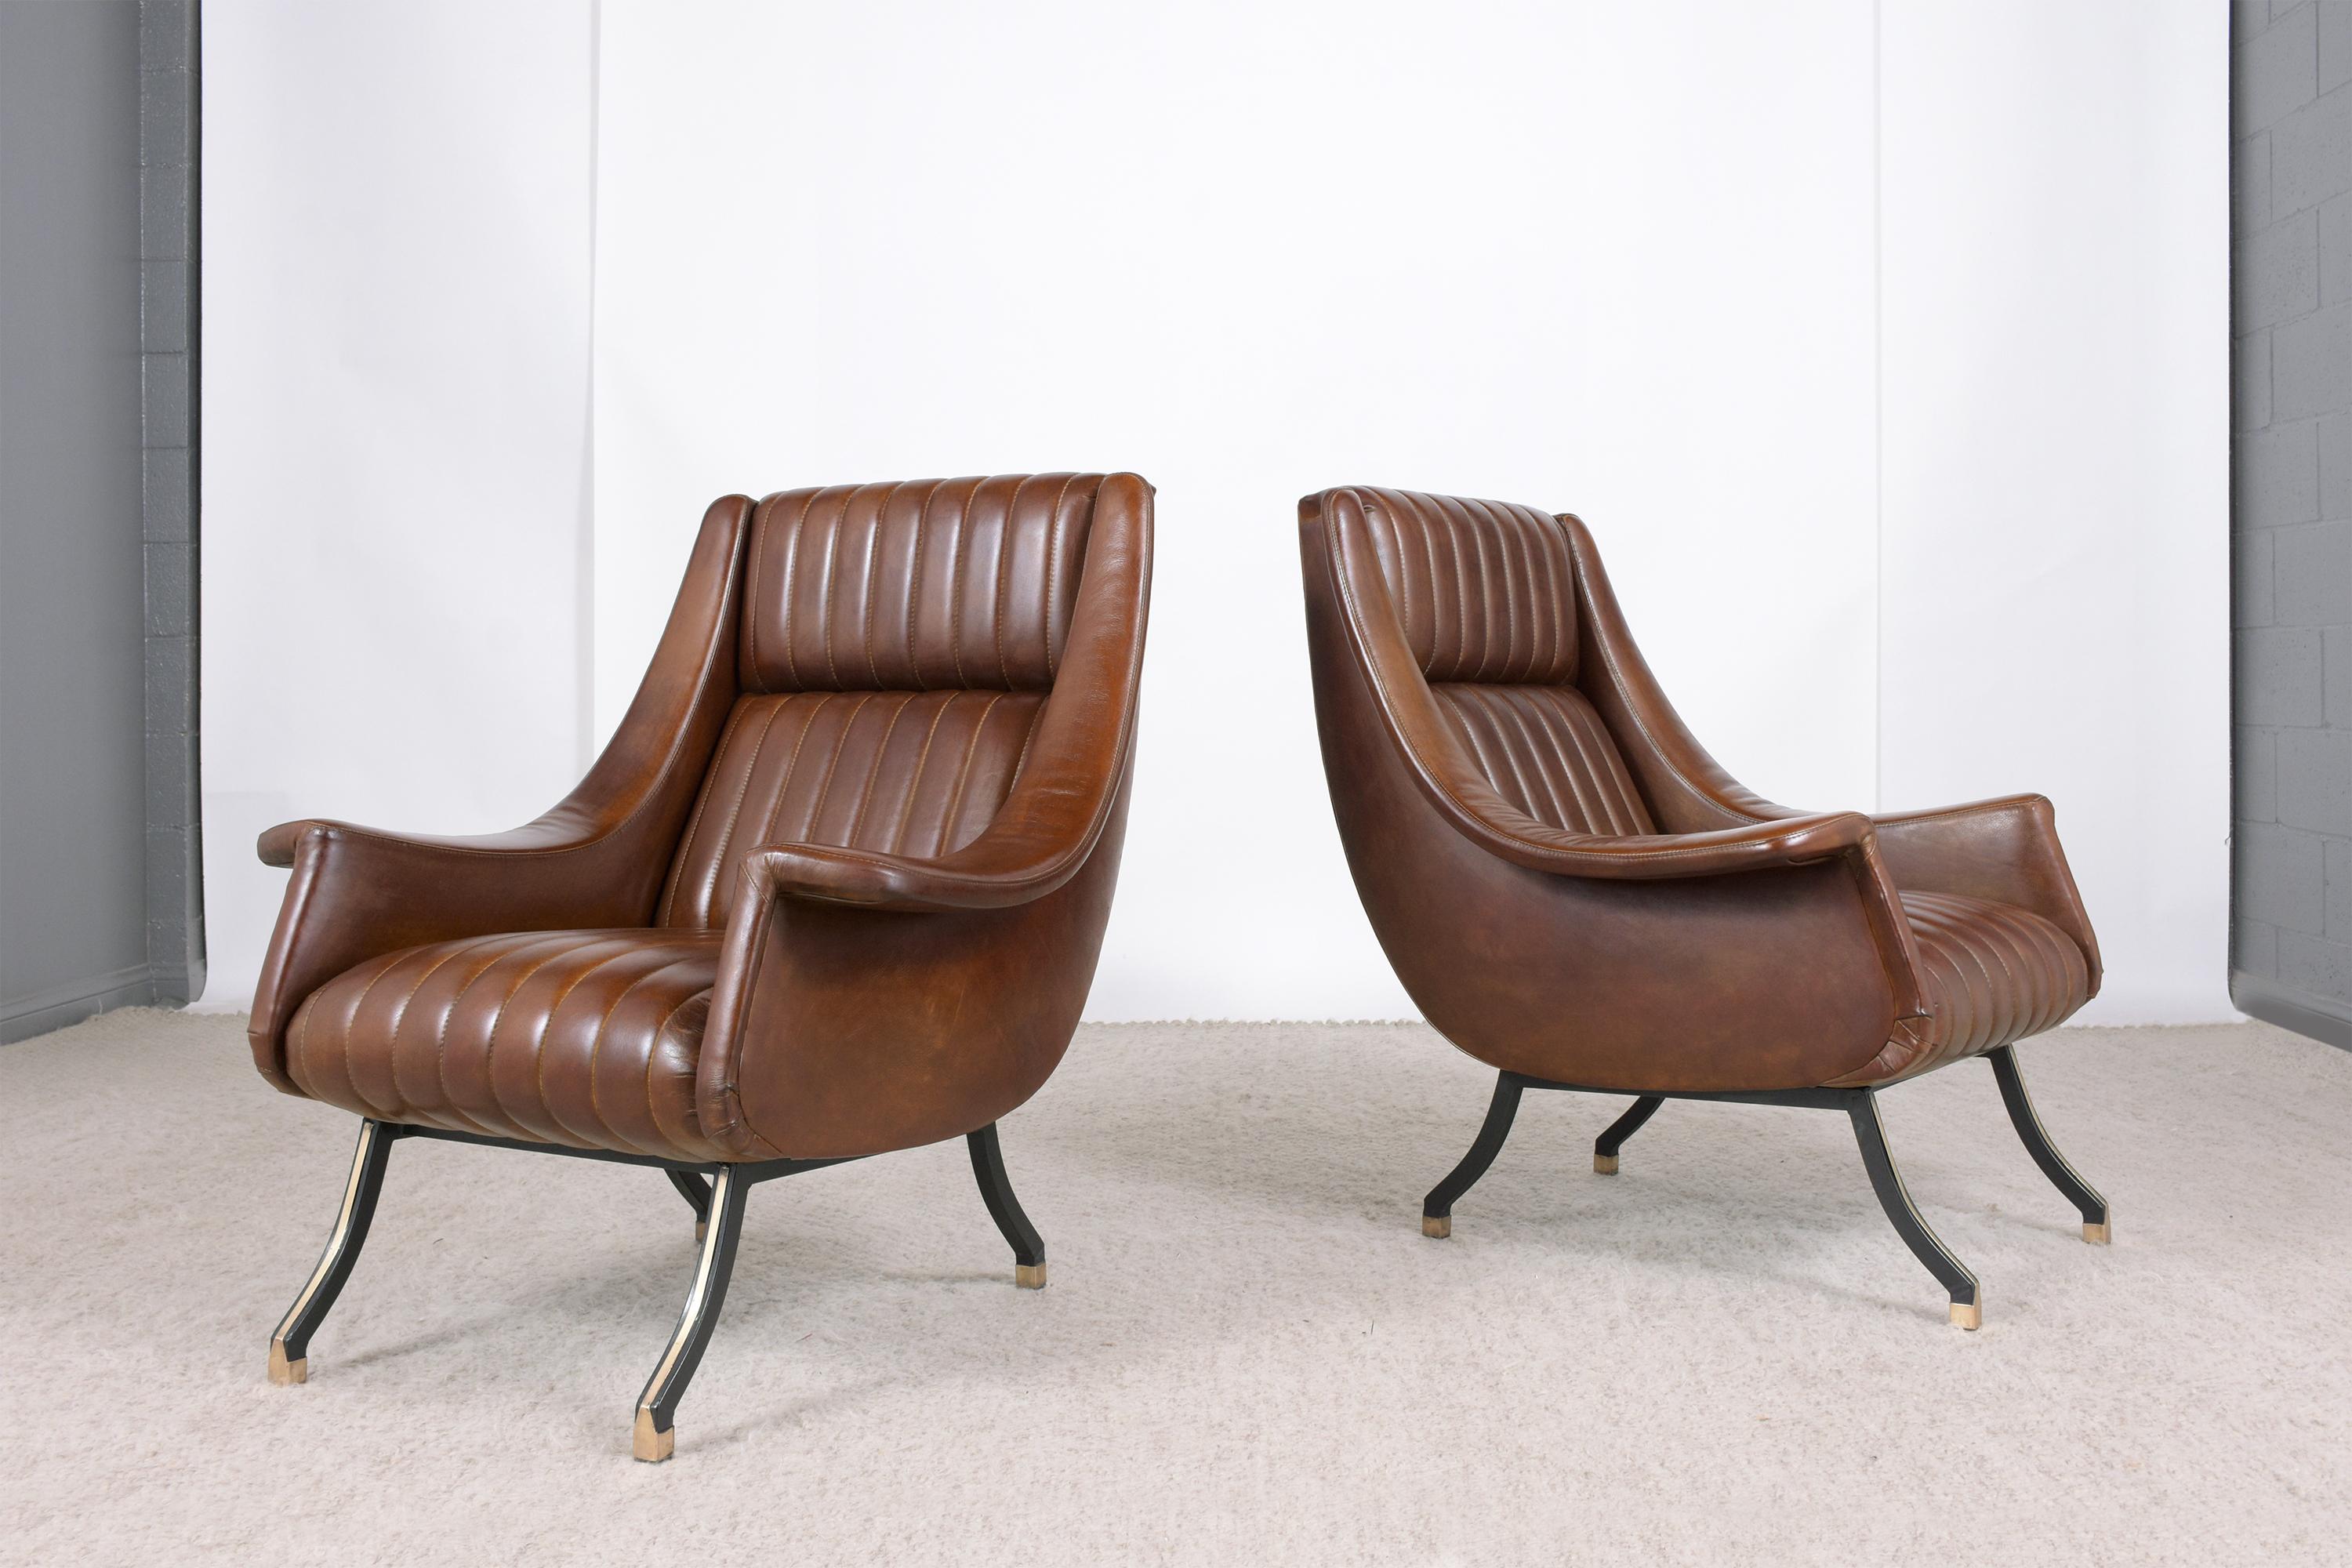 This vintage pair of Italian mid-century modern lounge chairs hand-crafted out of wood/iron combination was completed restored by our craftsmen team. The chairs are professionally upholstered in new English tan color leather with a tufted channel